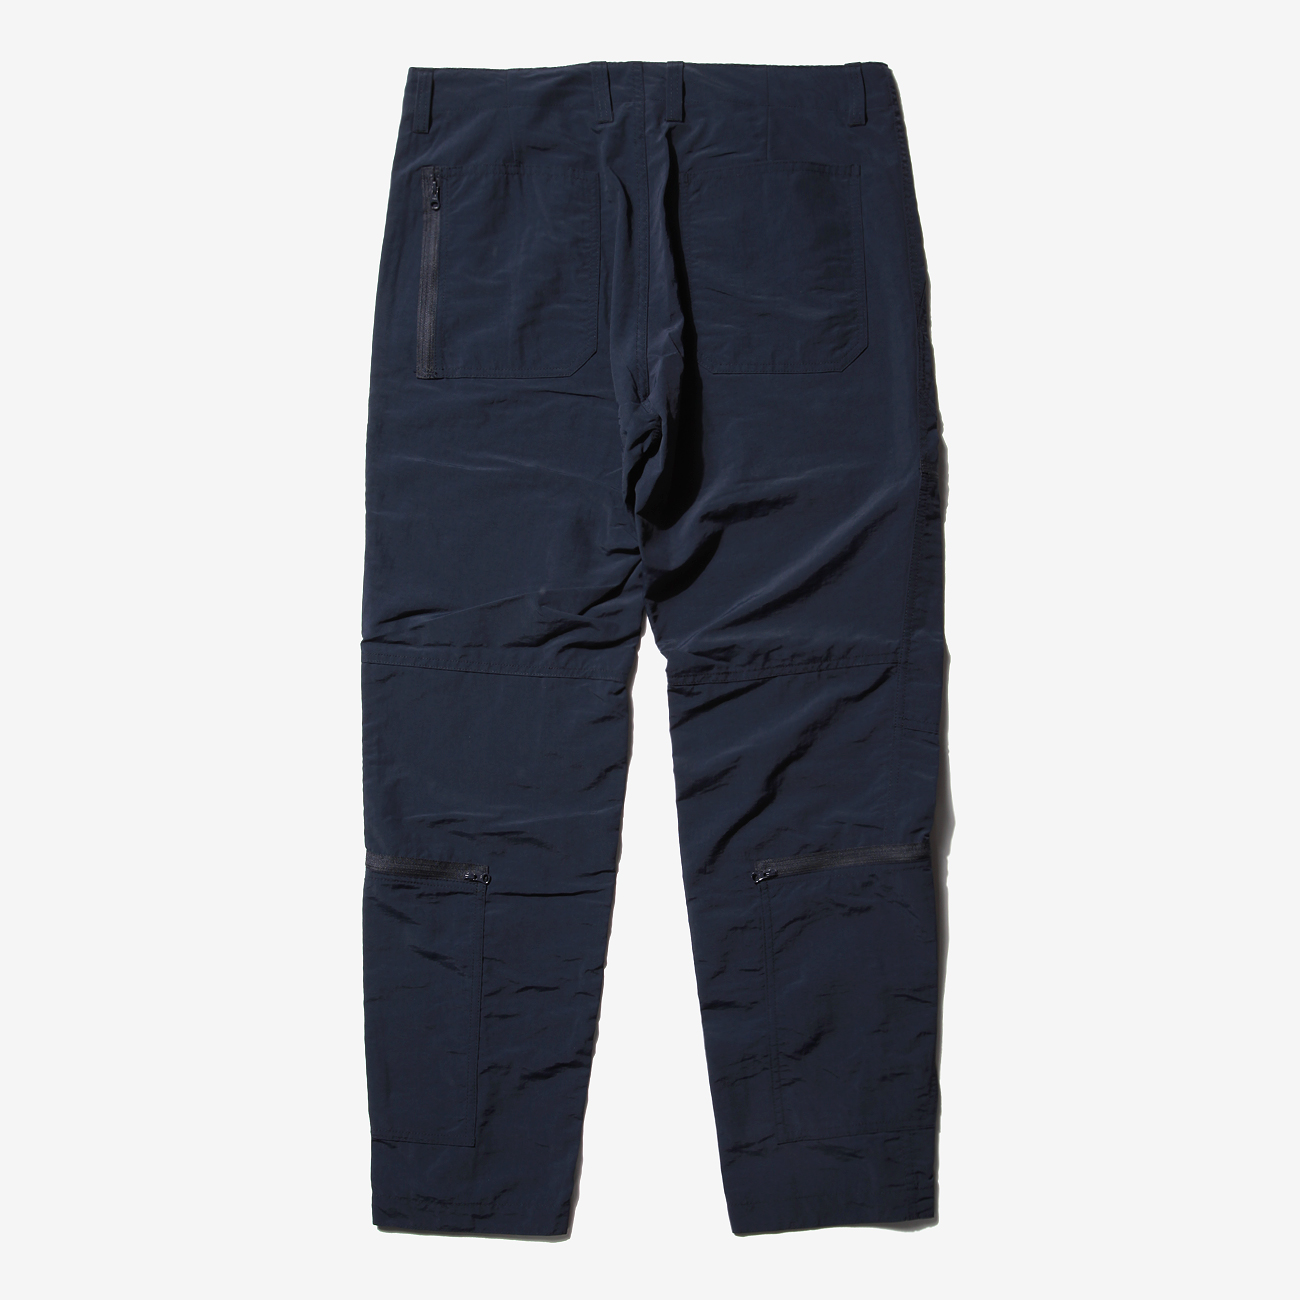 RESEARCH   CWU Trousers   Navy   通販   正規取扱店   COLLECT STORE